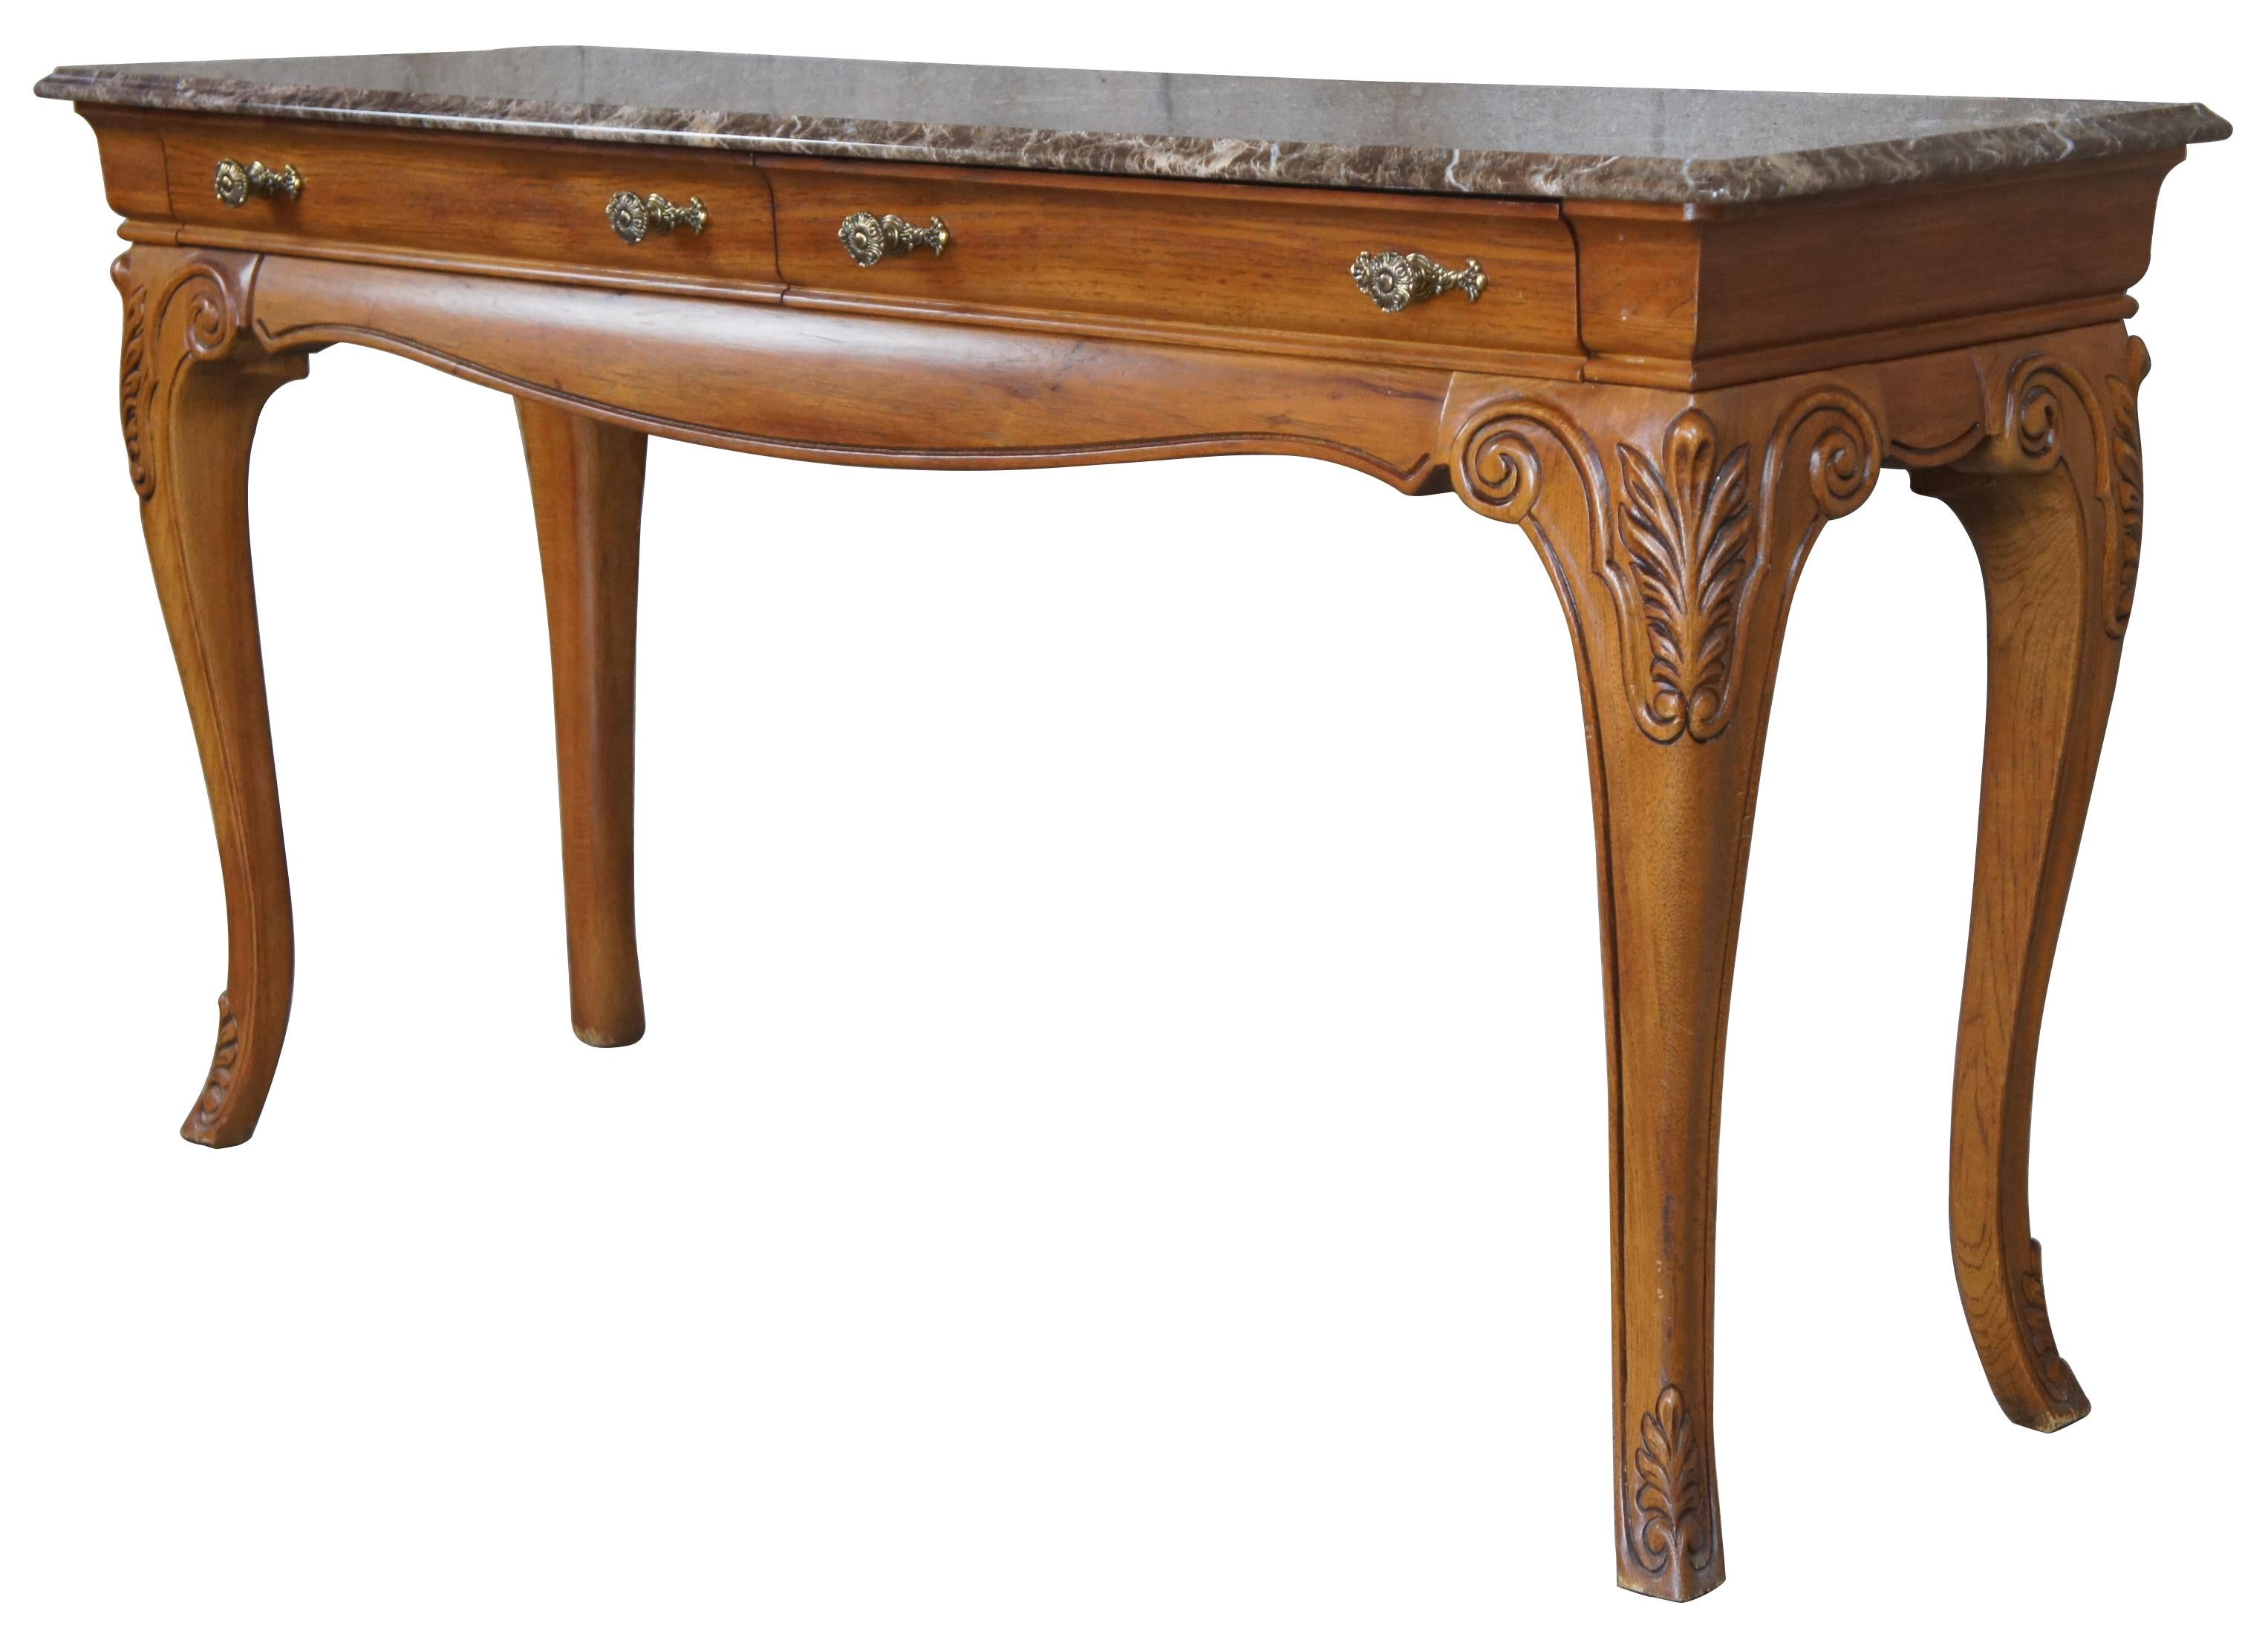 Thomasville Furniture French Country sofa table, 27131-722. Circa 1990s. Made of oak with serpentine form and cabriole legs. Features two drawers and a brown / tan / white marble top. Measure: 55